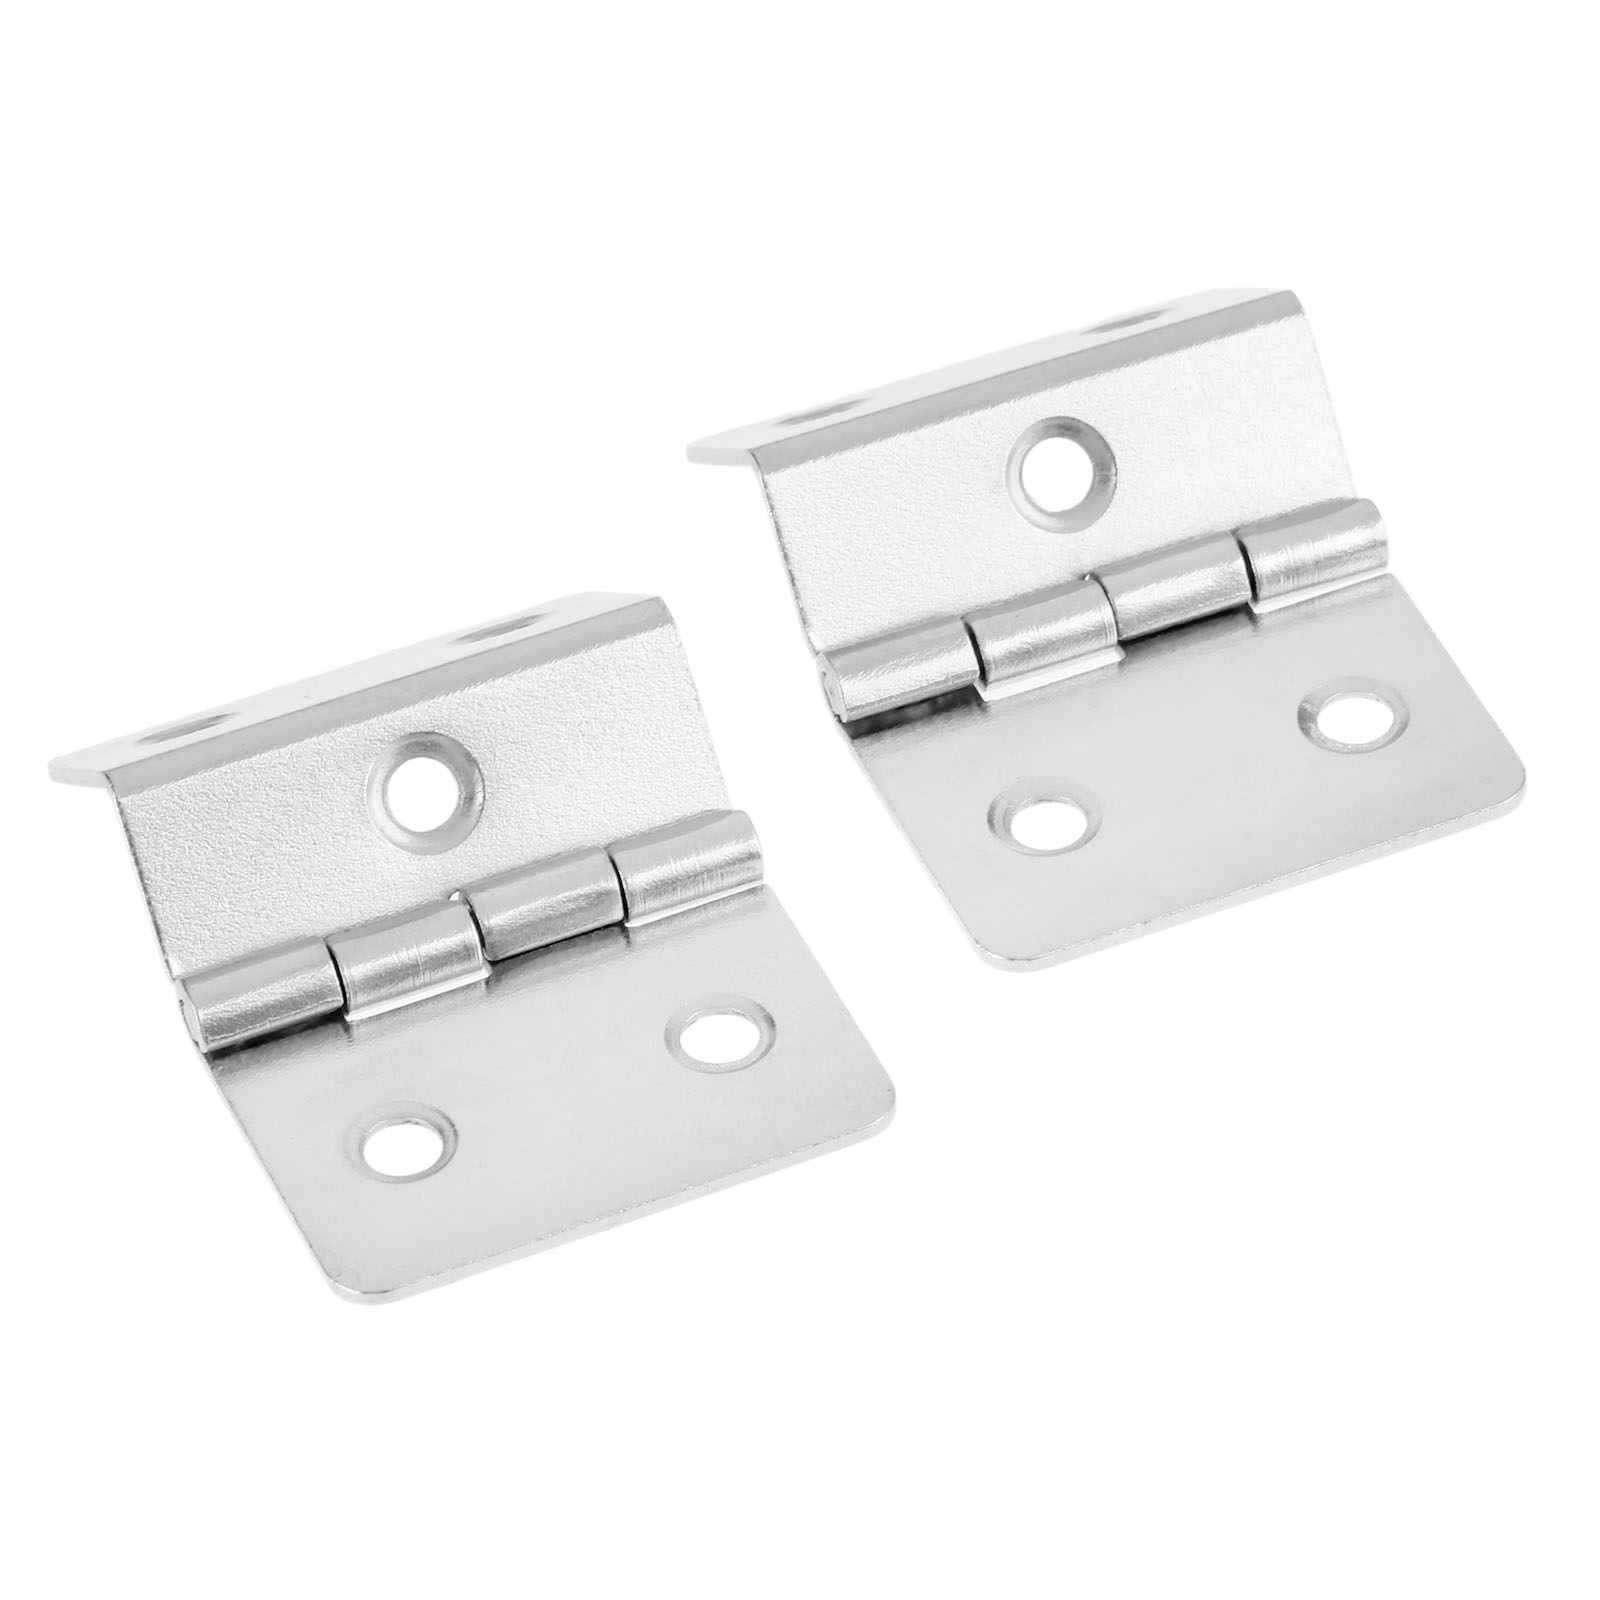 2Pcs Kitchen Cabinet Door Folded Hinges Furniture Accessories 5 Holes Drawer Hinges for Jewelry Boxes Furniture Fittings